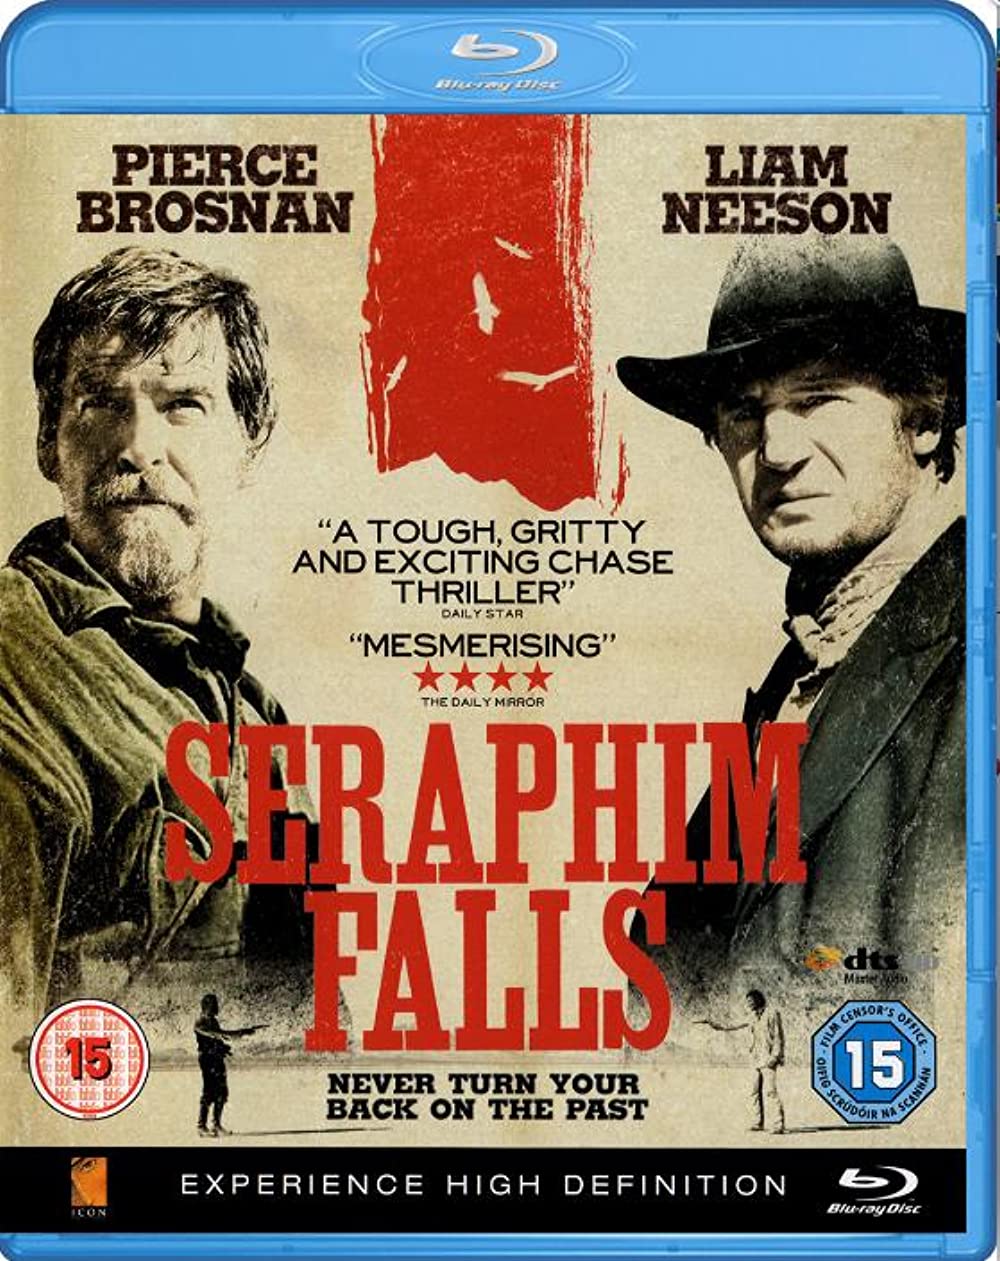 Download Behind the Scenes of 'Seraphim Falls' Movie | Watch Behind The Scenes Of 'seraphim Falls' Movie Review